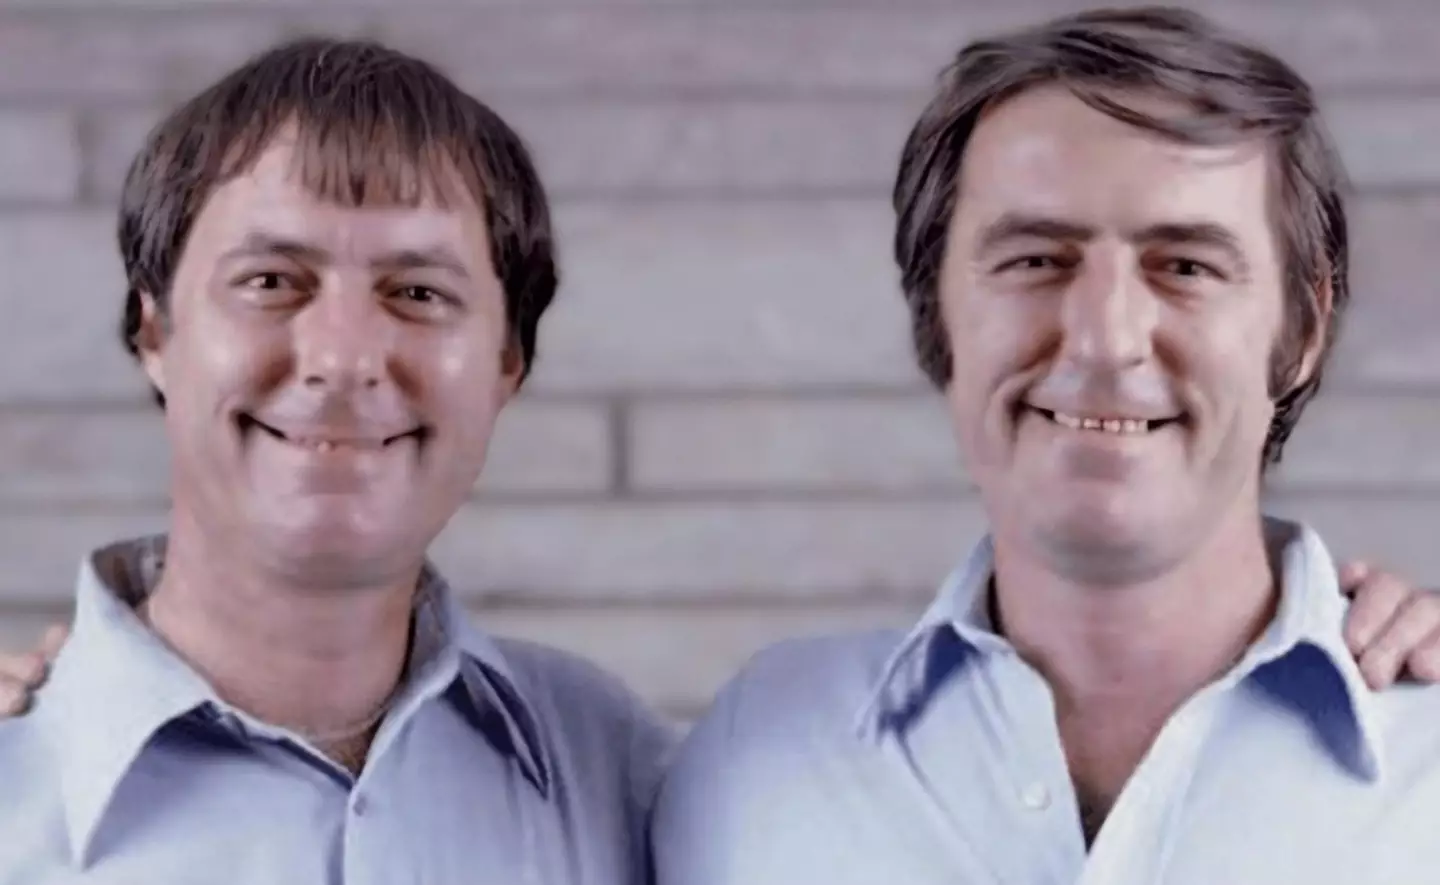 The 'Jim twins' led near-identical lives. (YouTube)